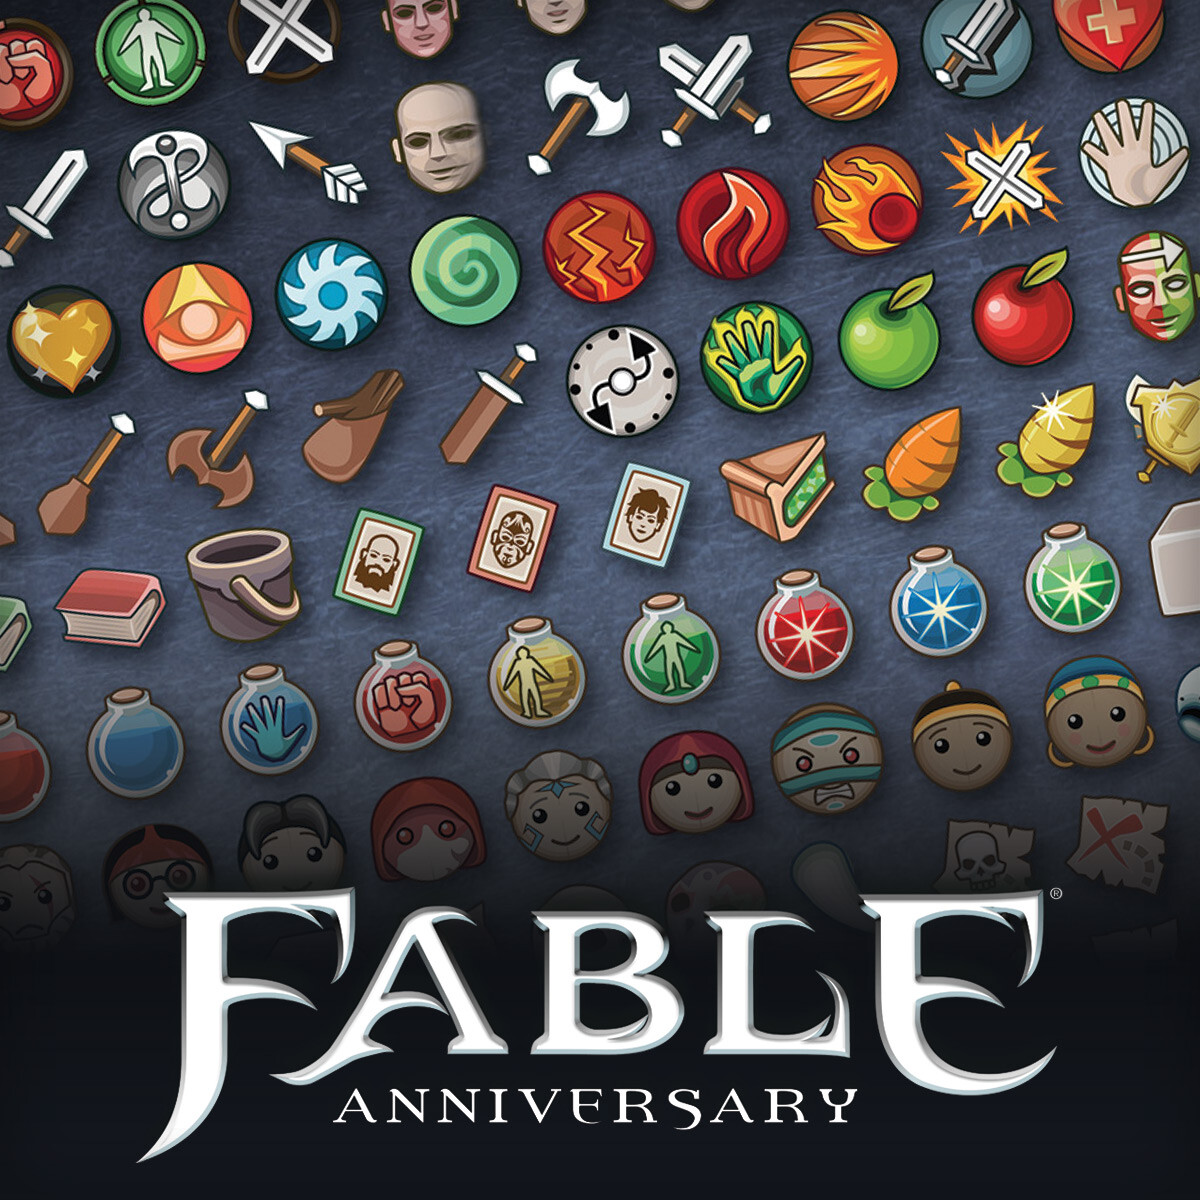 ArtStation - Fable Anniversary - Icons, Jenny Brewer